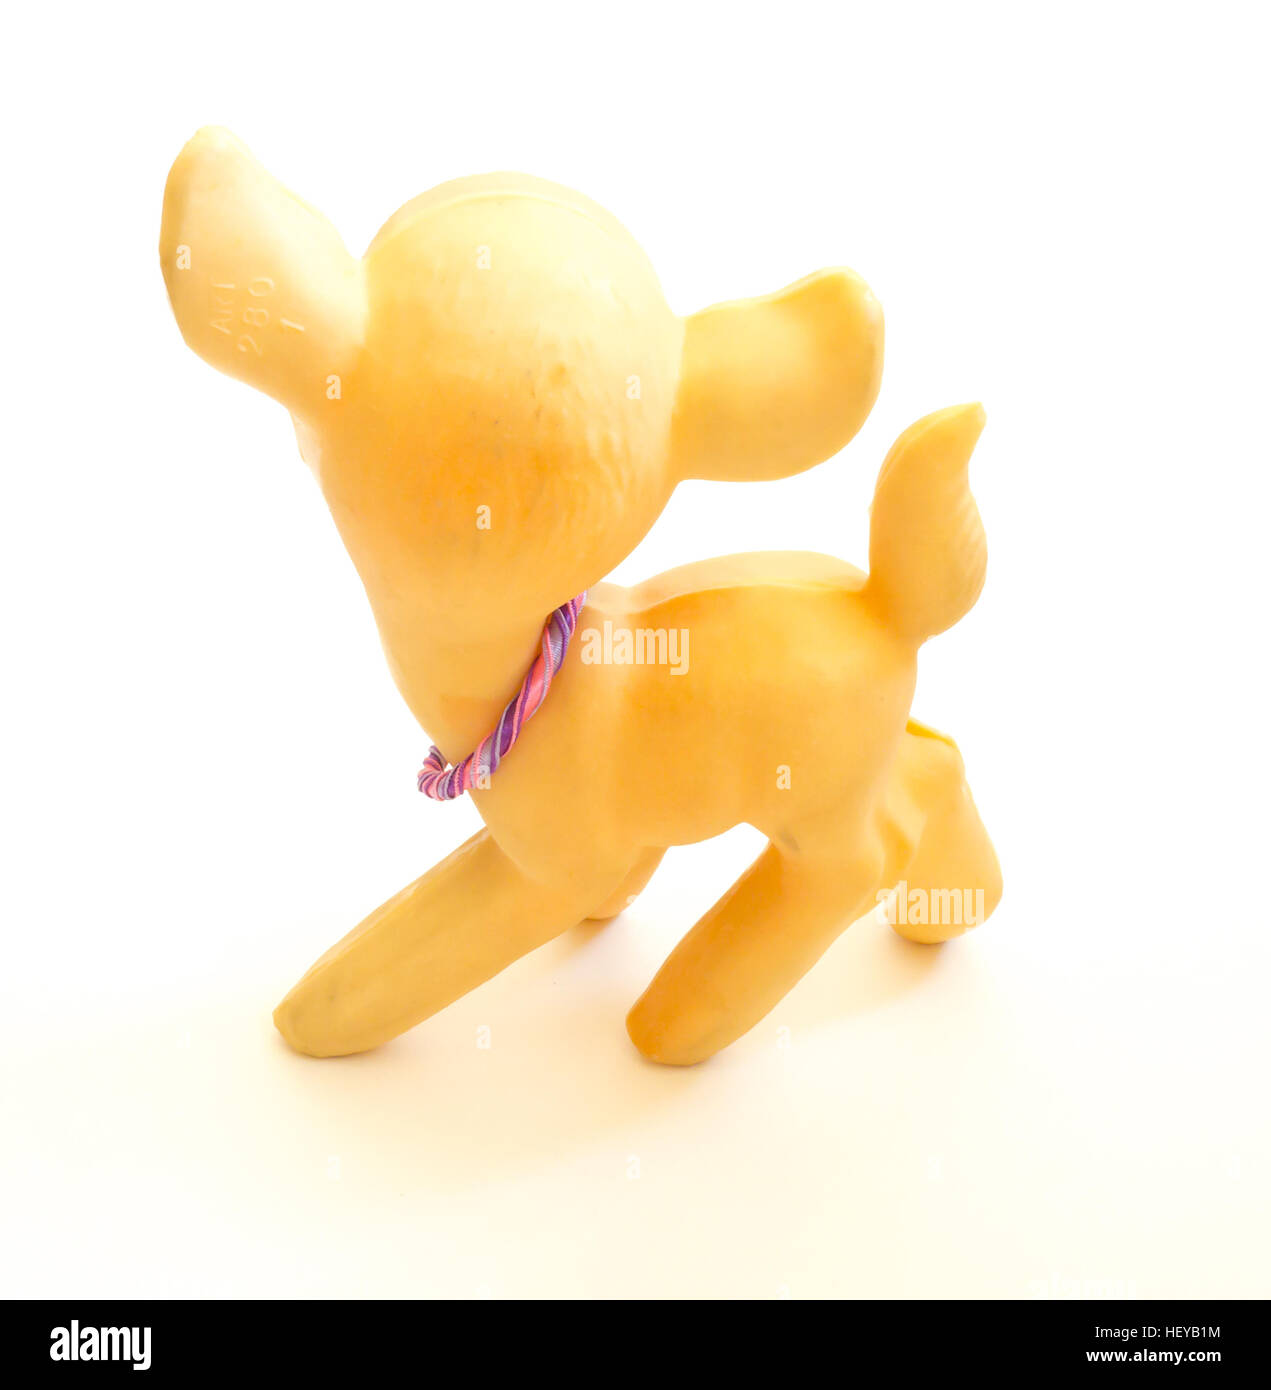 The Miniature yellow toy fawn. Stock Photo